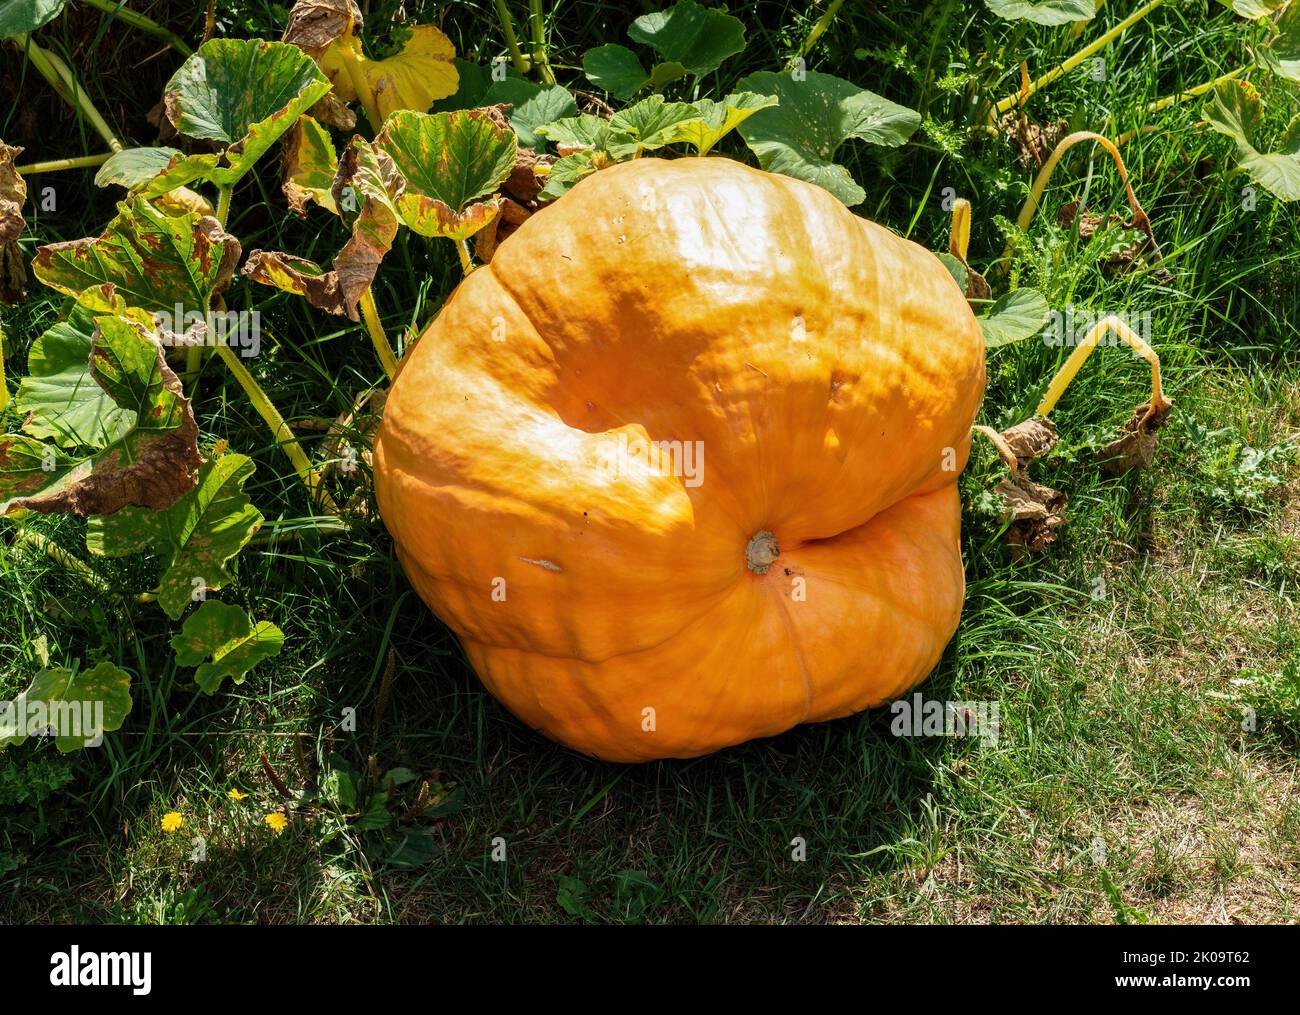 Big orange Pumpkin growing in the garden on a sunny summer day Stock Photo